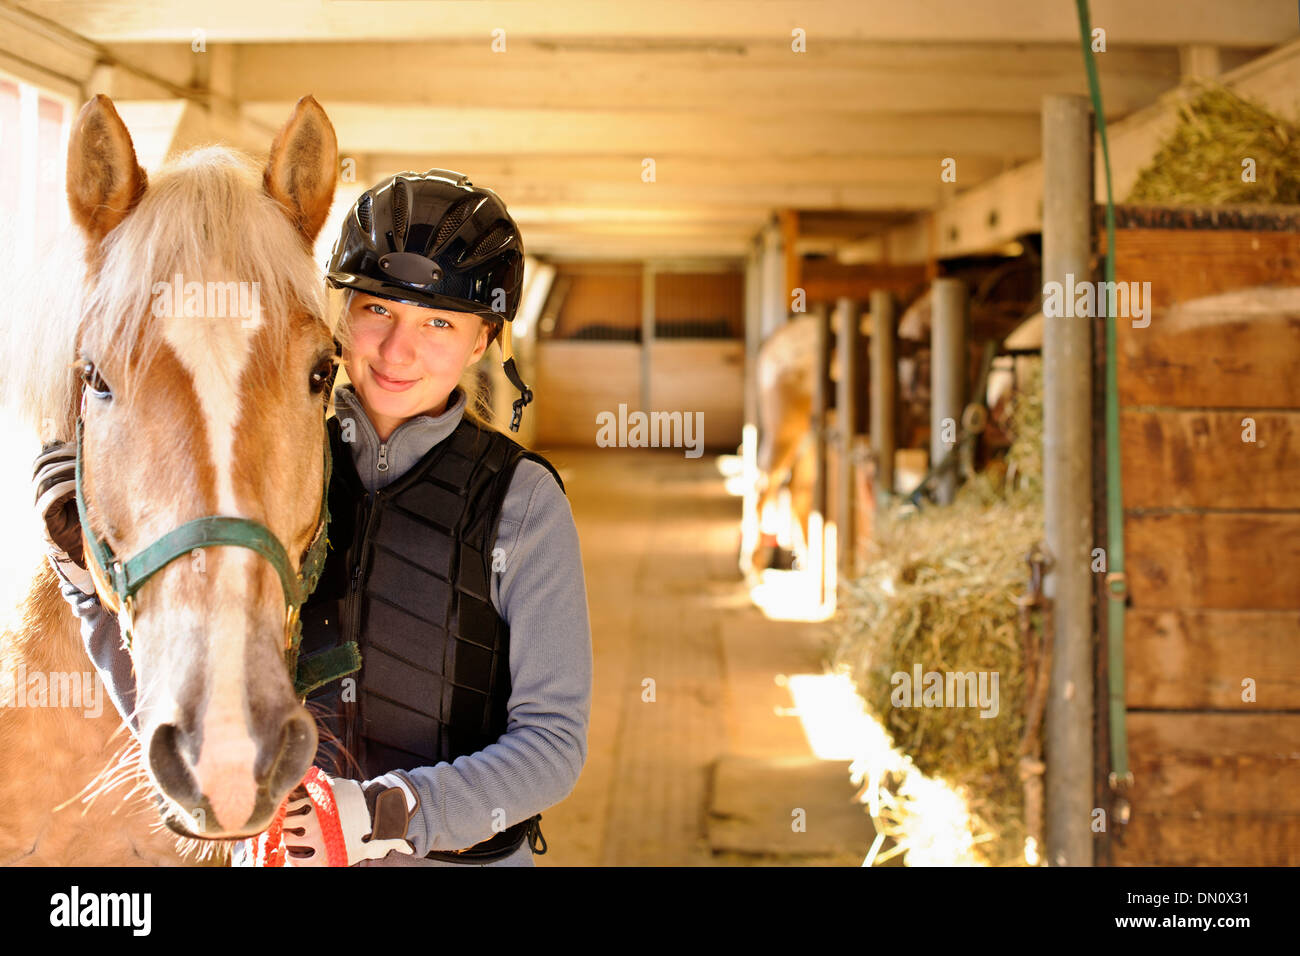 Young female rider with horse inside stable Stock Photo